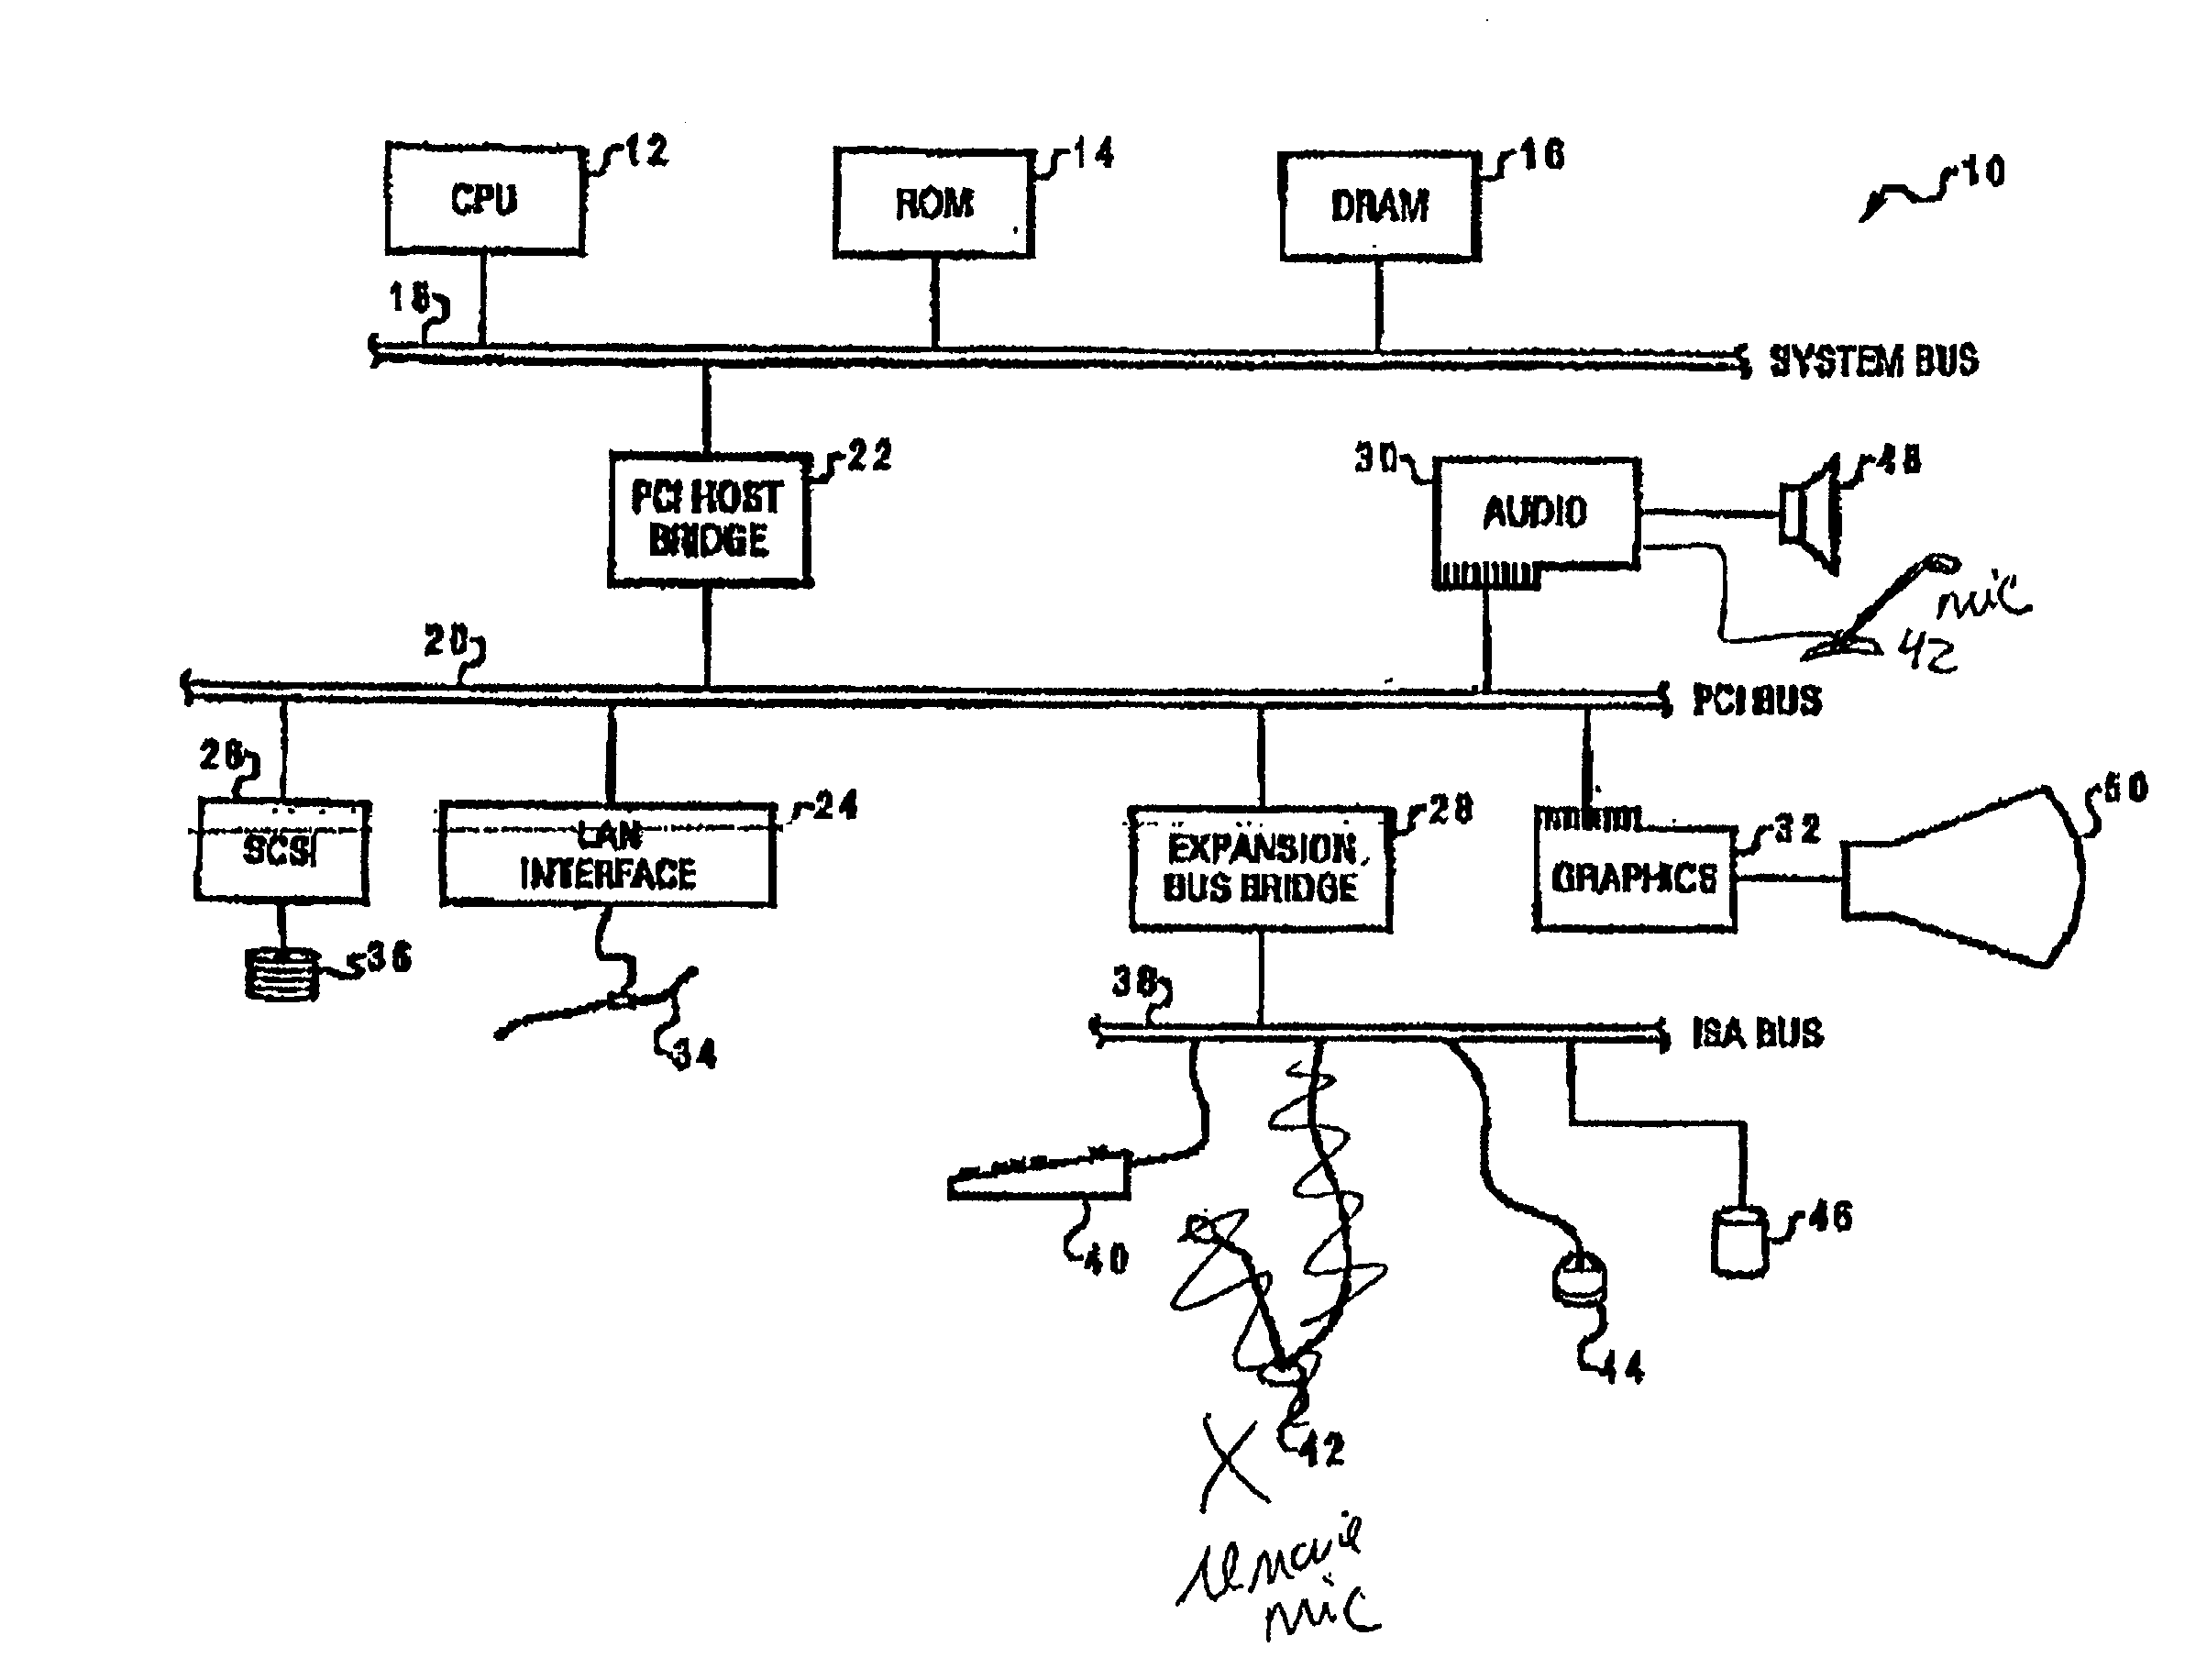 Method and system for automatically detecting and powering PC speakers